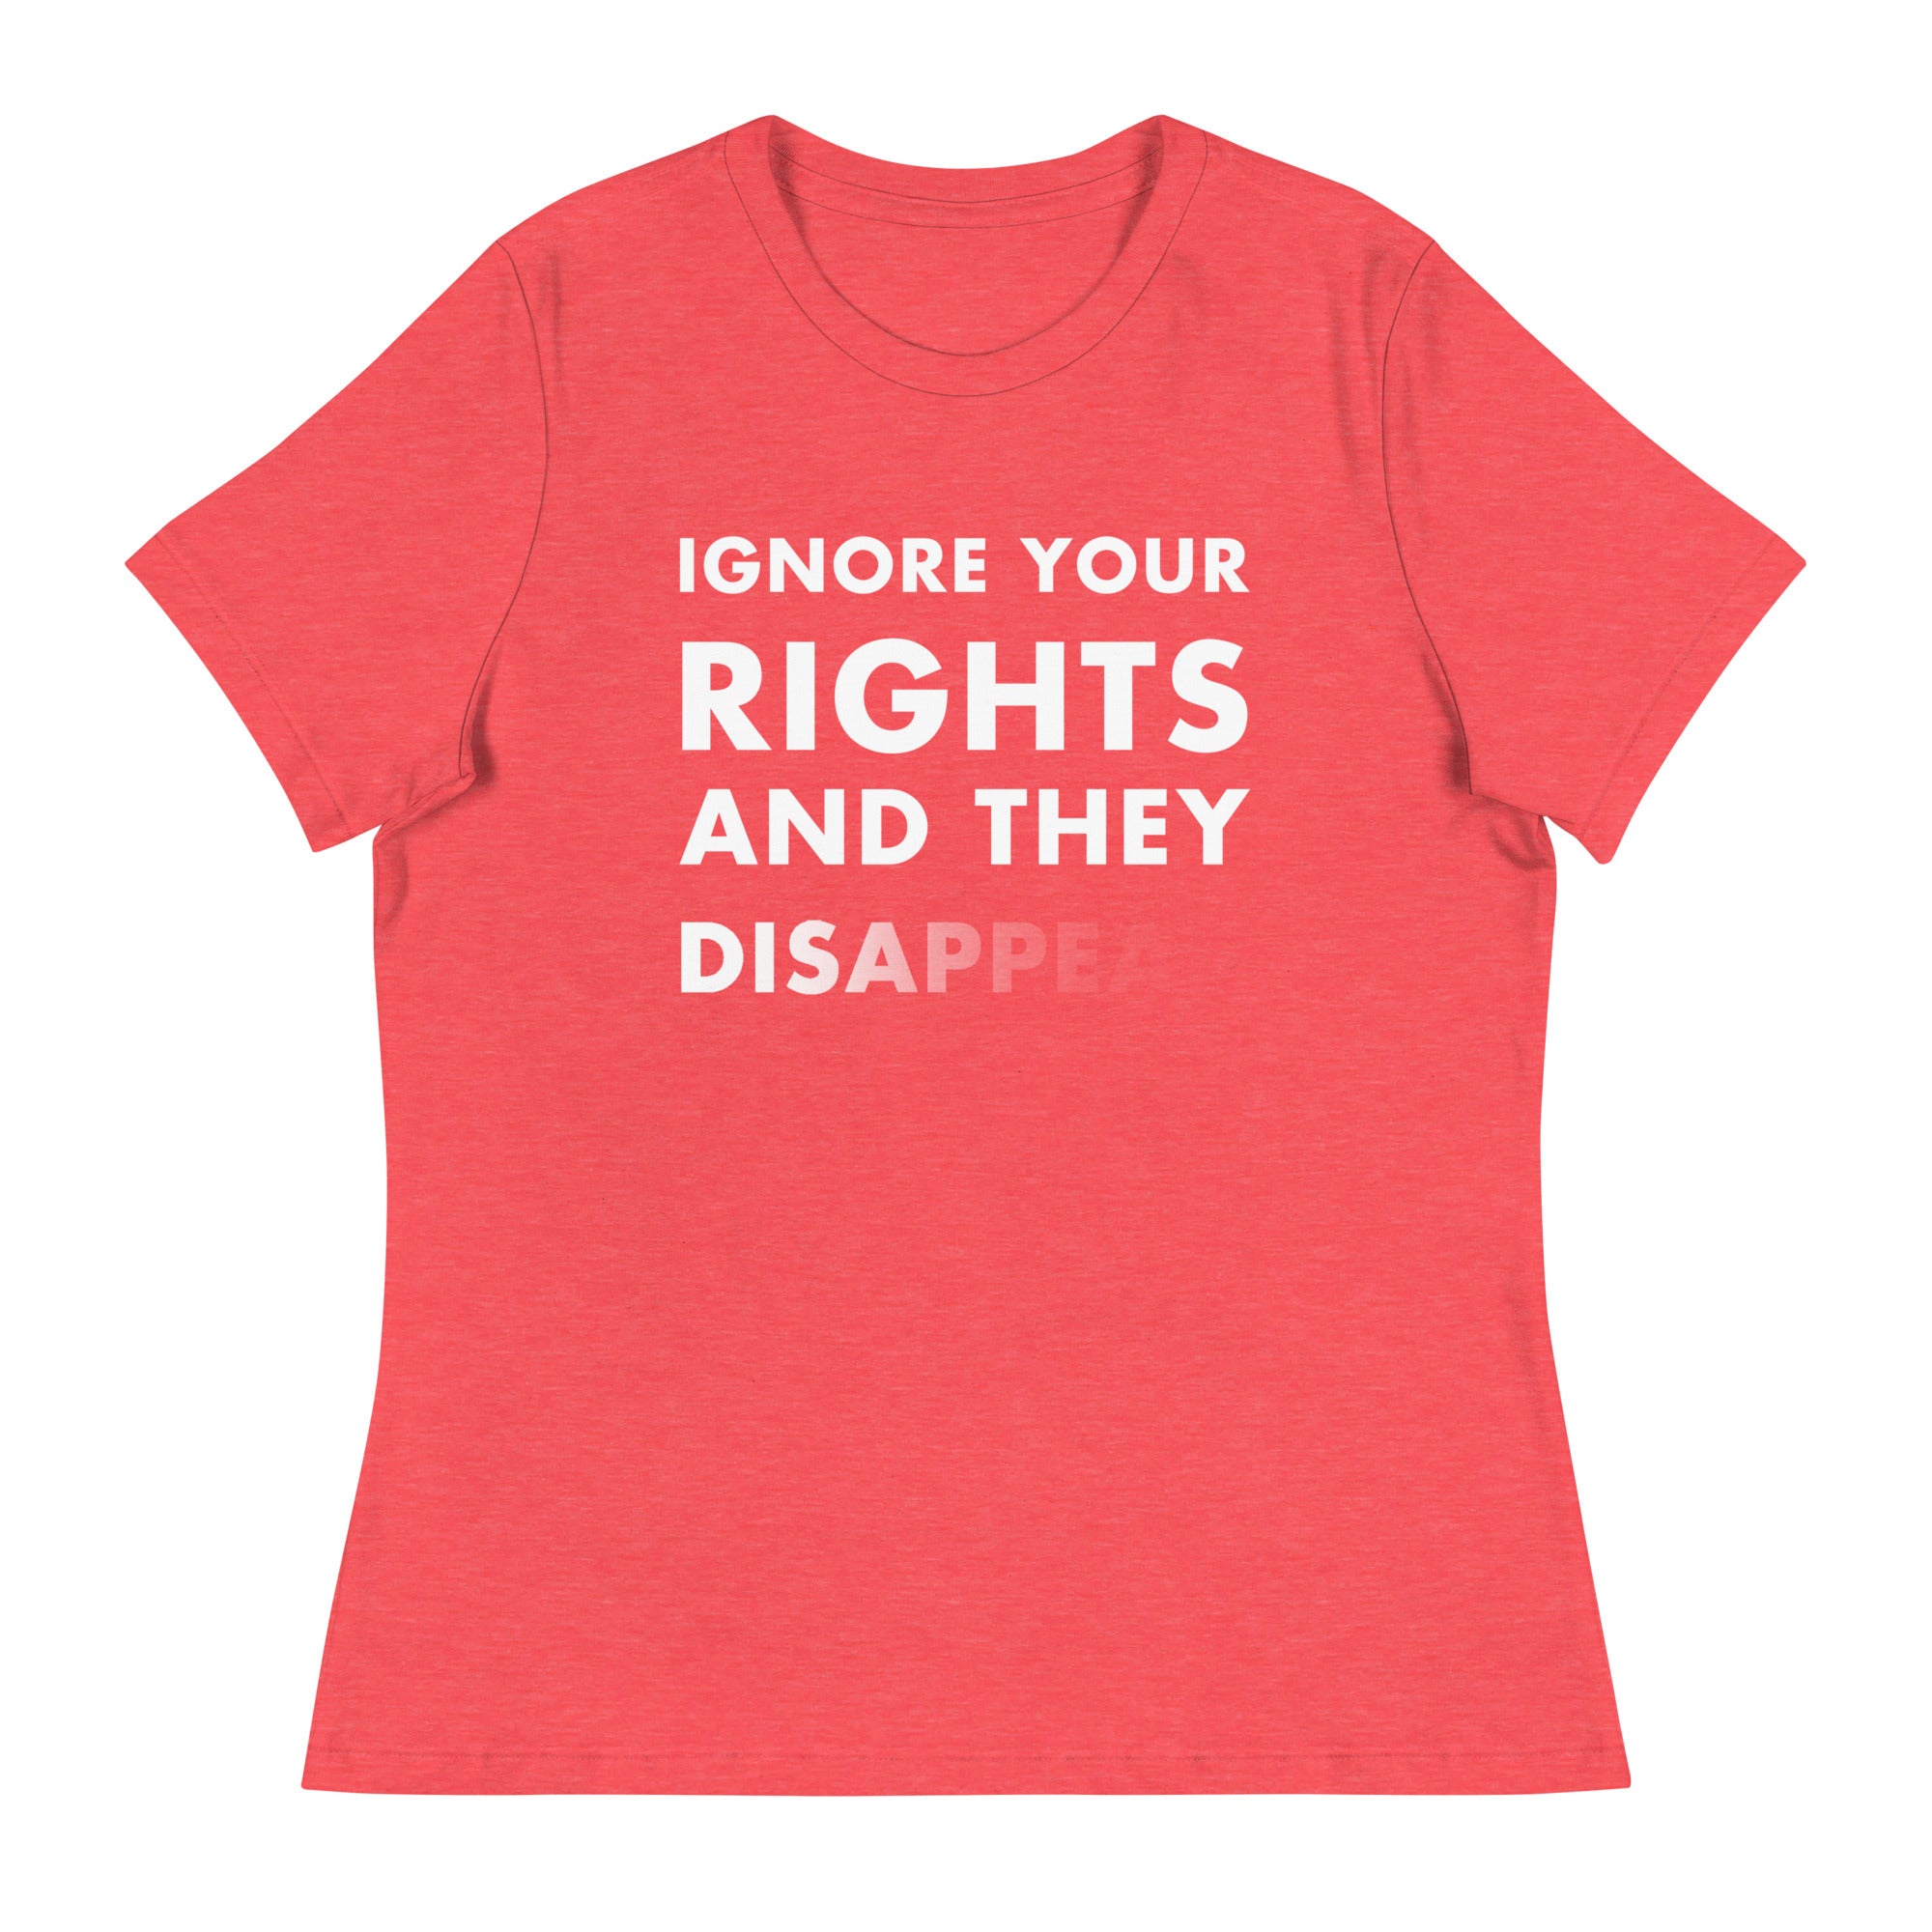 Ignore Your Rights and they Disappear Short Sleeve Women's T-shirt